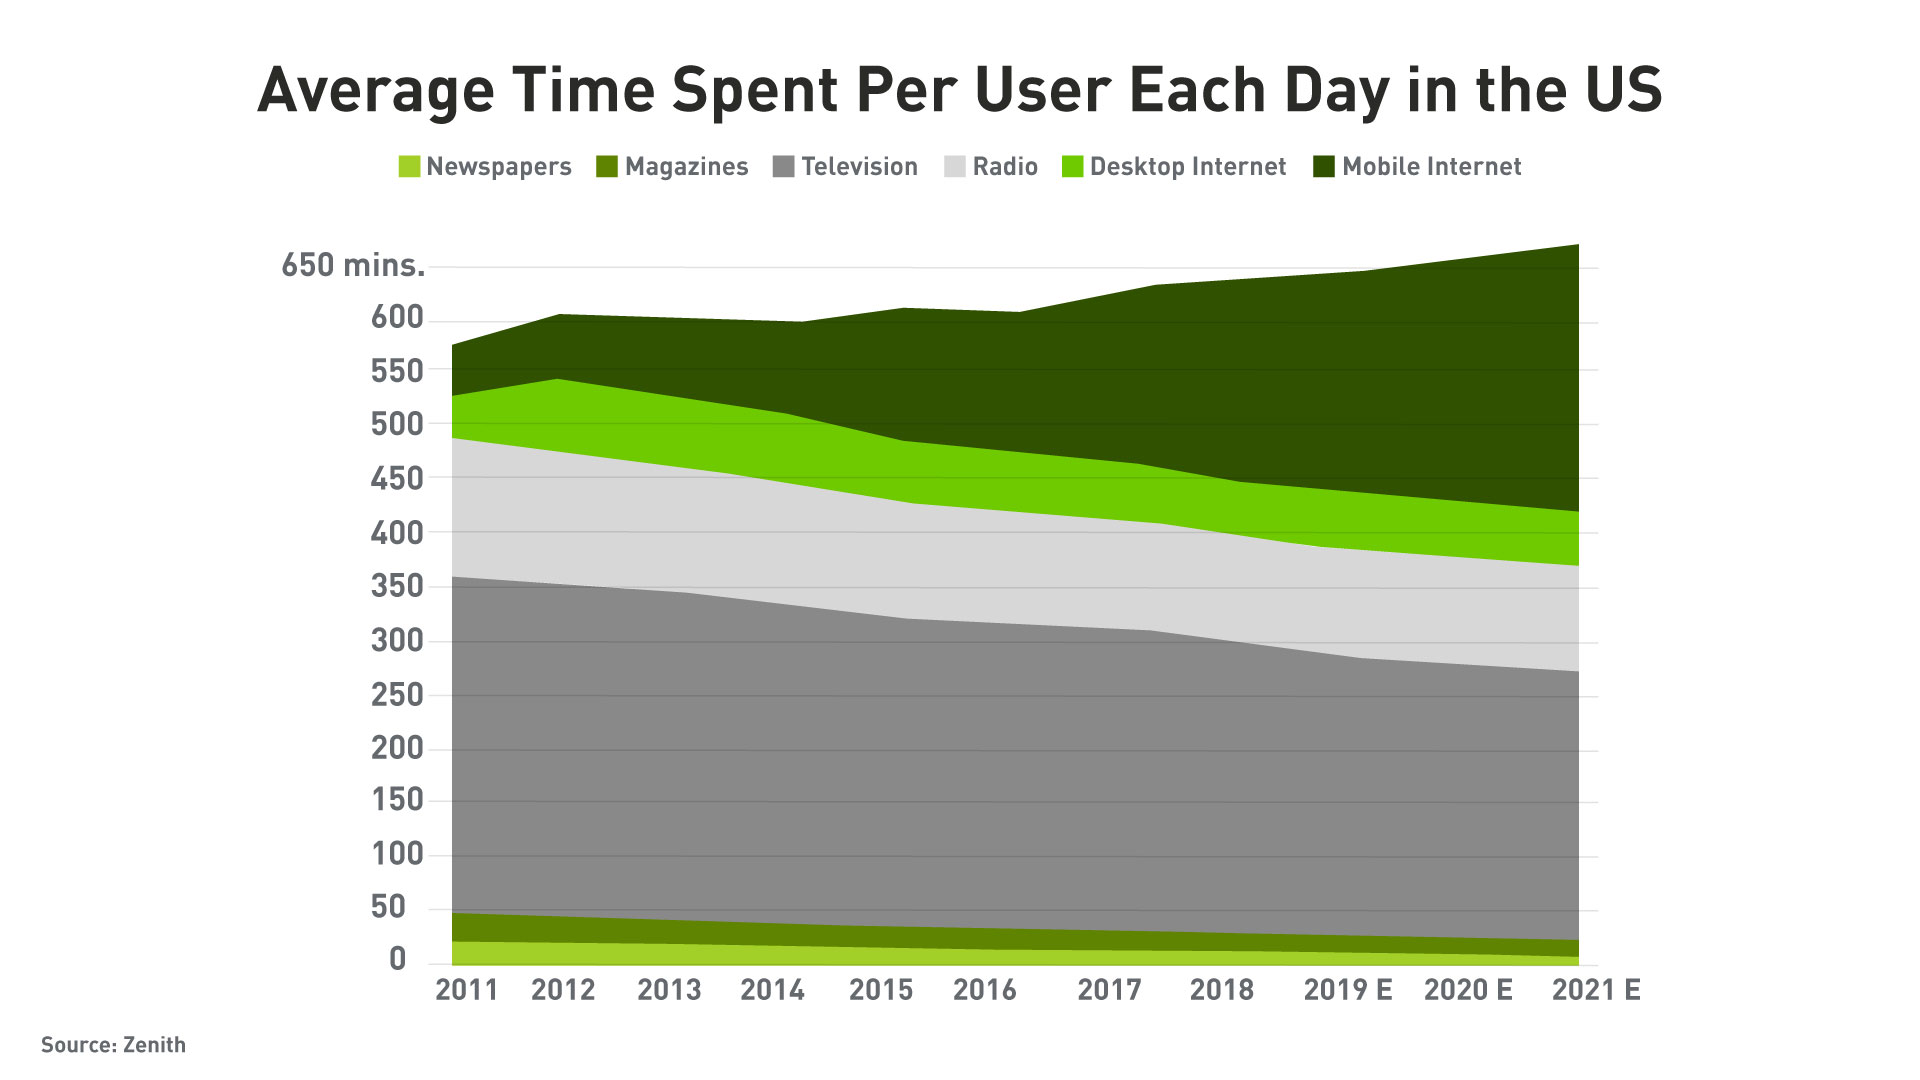 Average Time Spent Per User Each Day in the US by Media